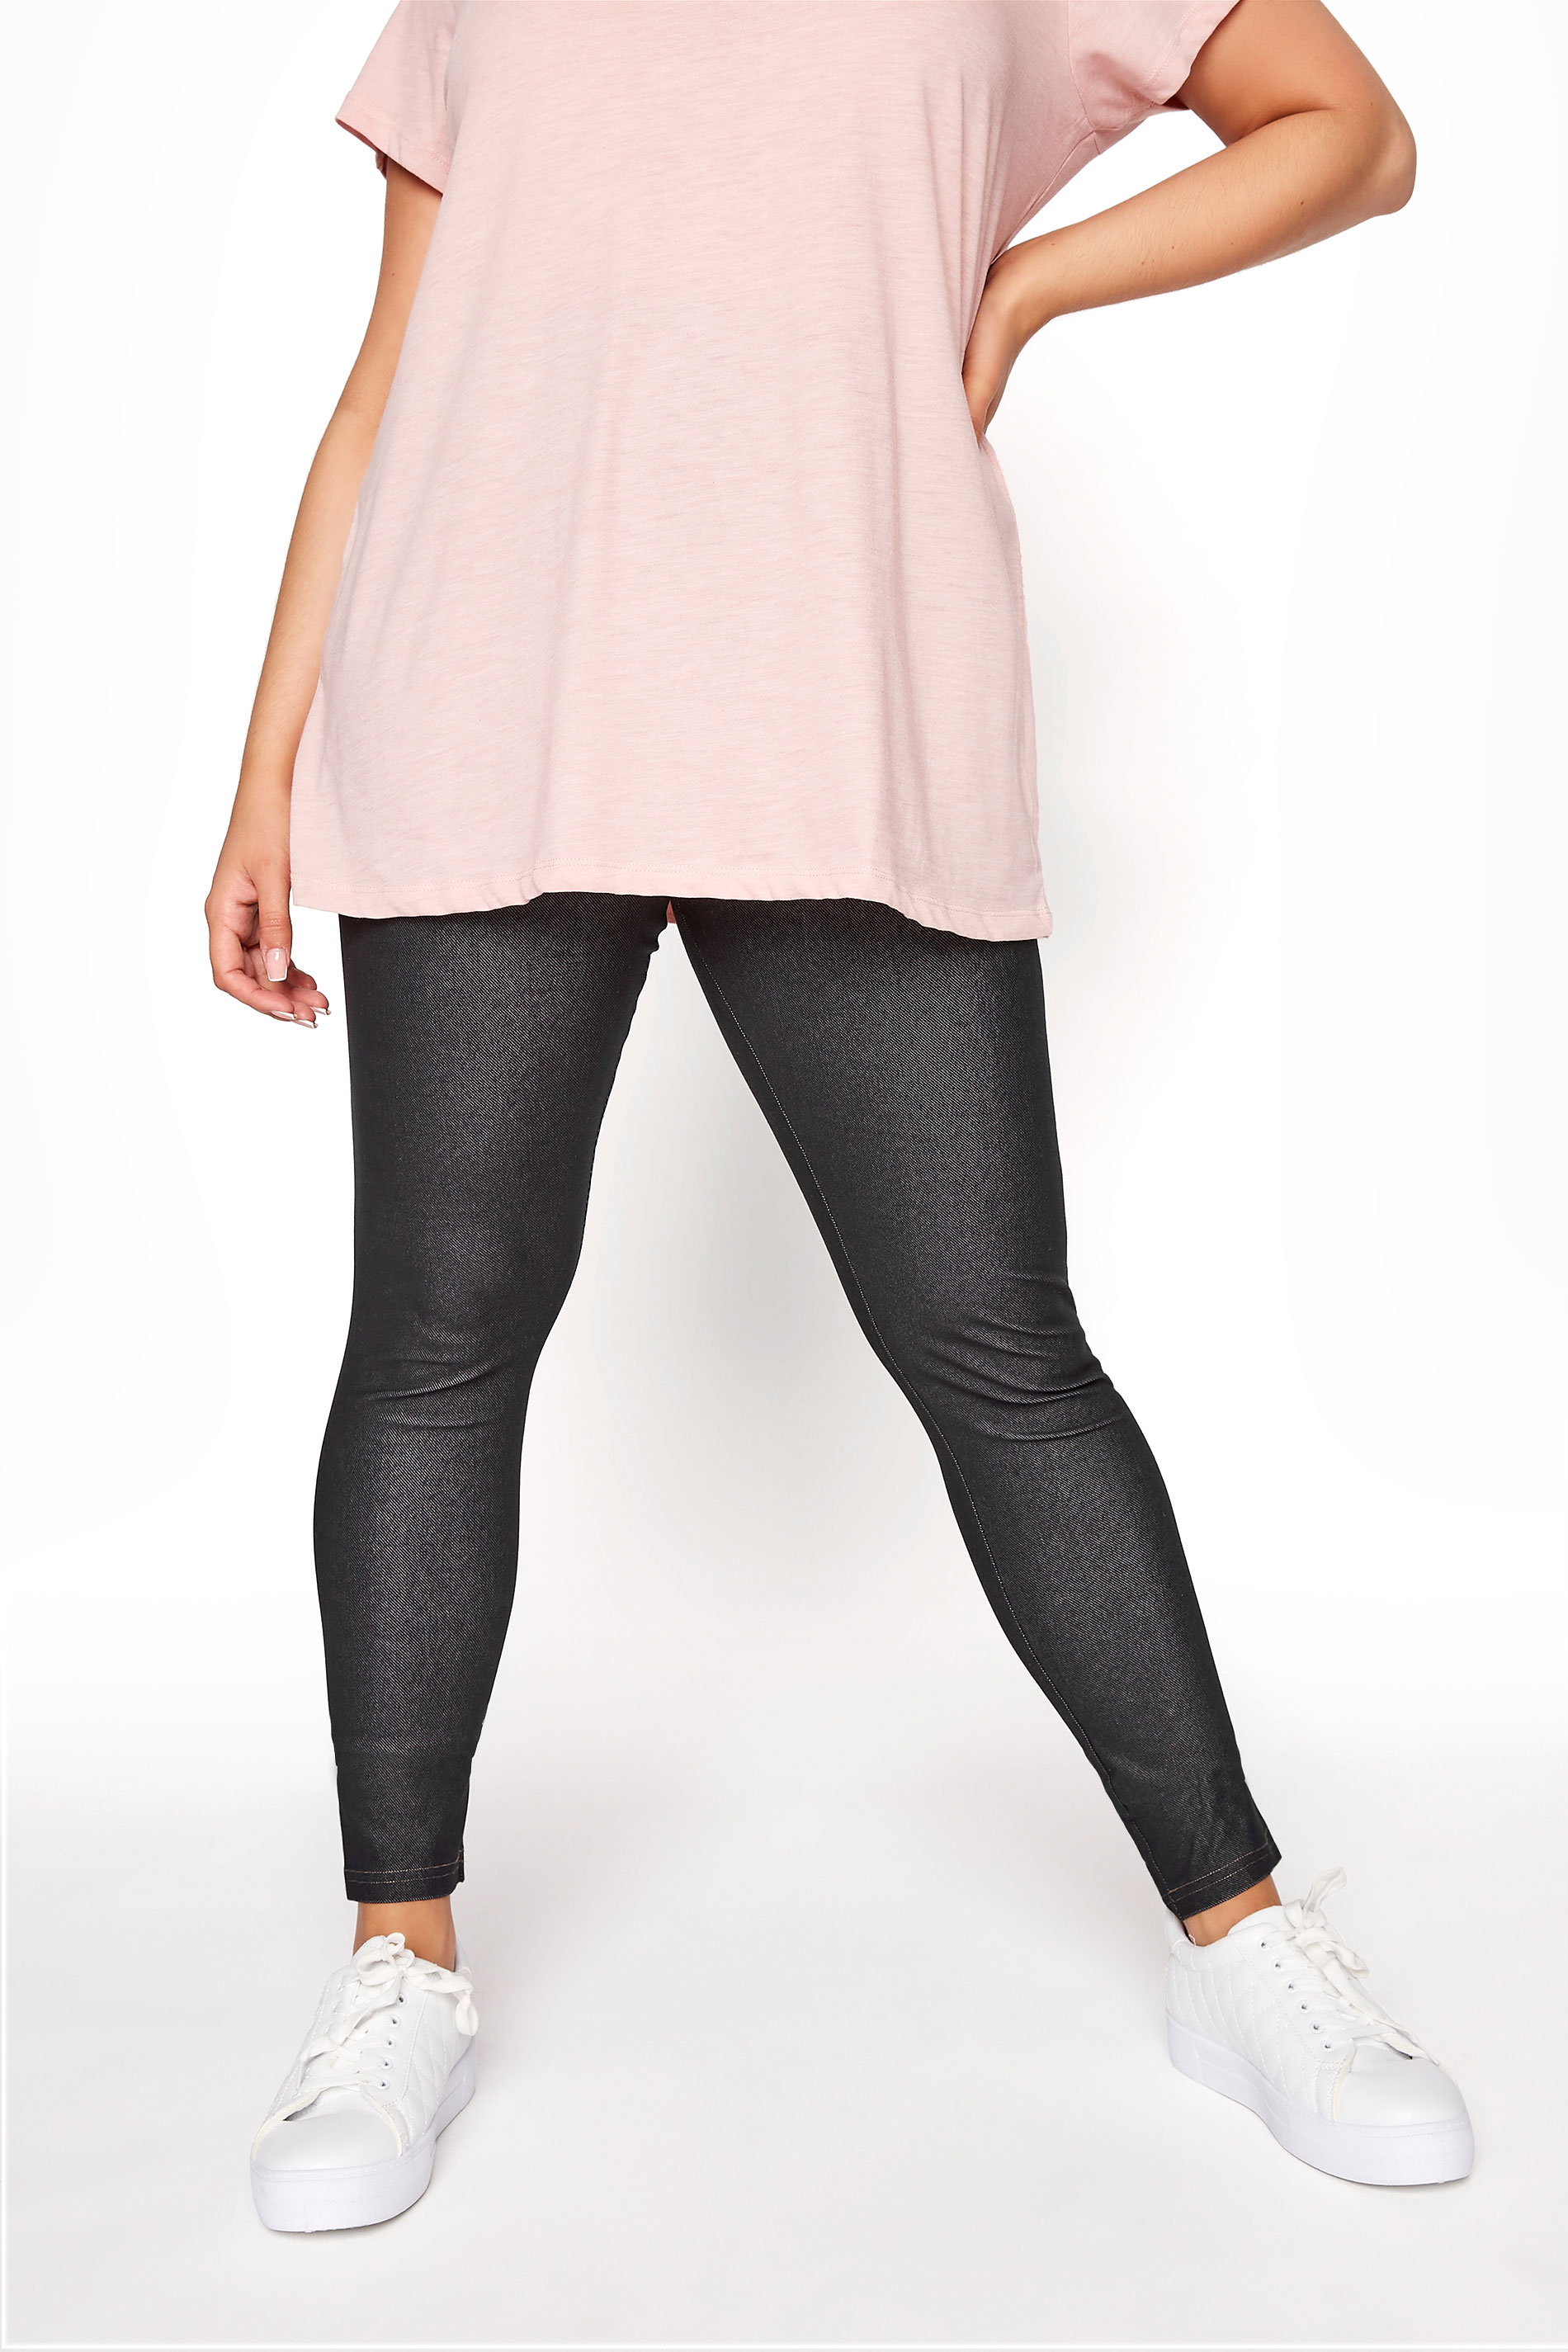 YOURS FOR GOOD Curve Black Jersey Jeggings_B.jpg